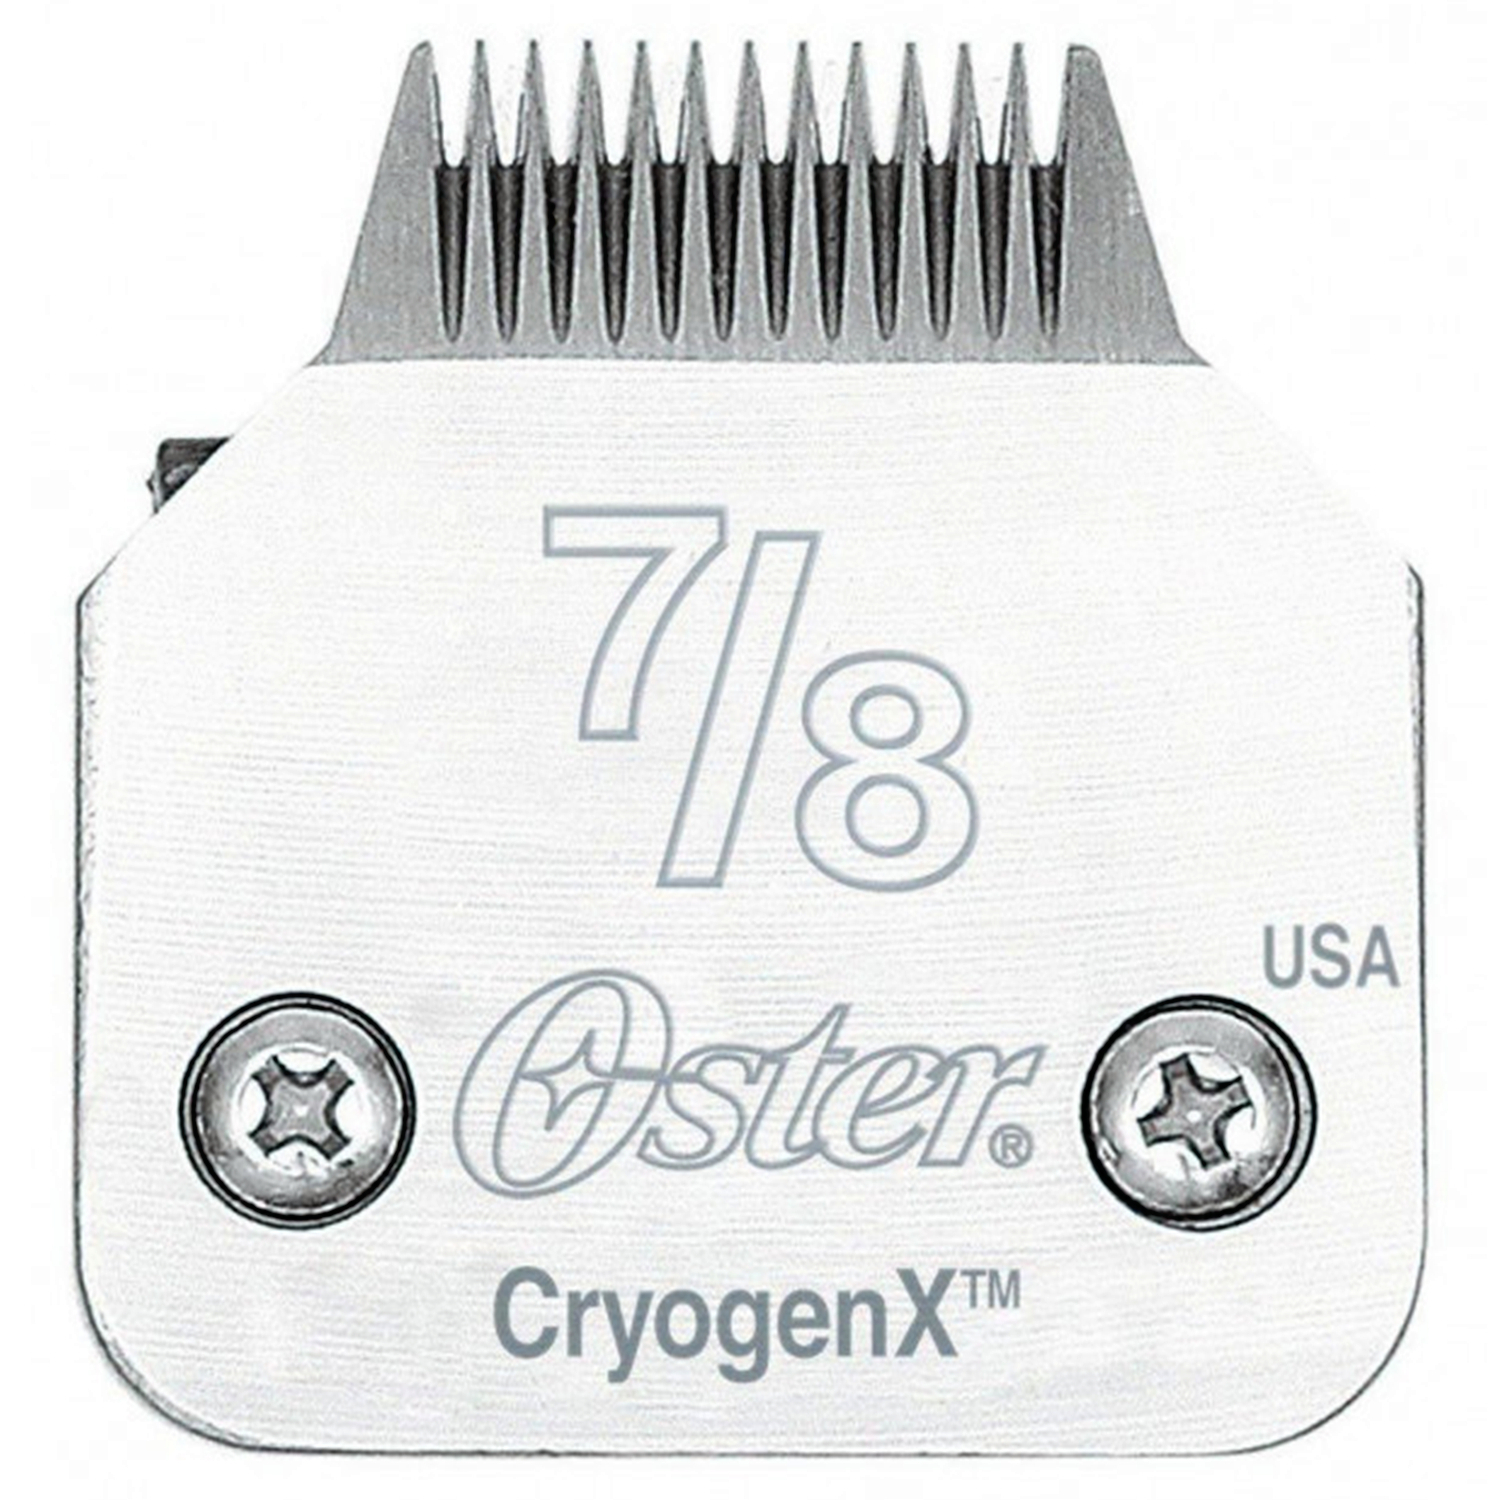 Size 5/8 Oster Clipper Blades Cryogen-X 